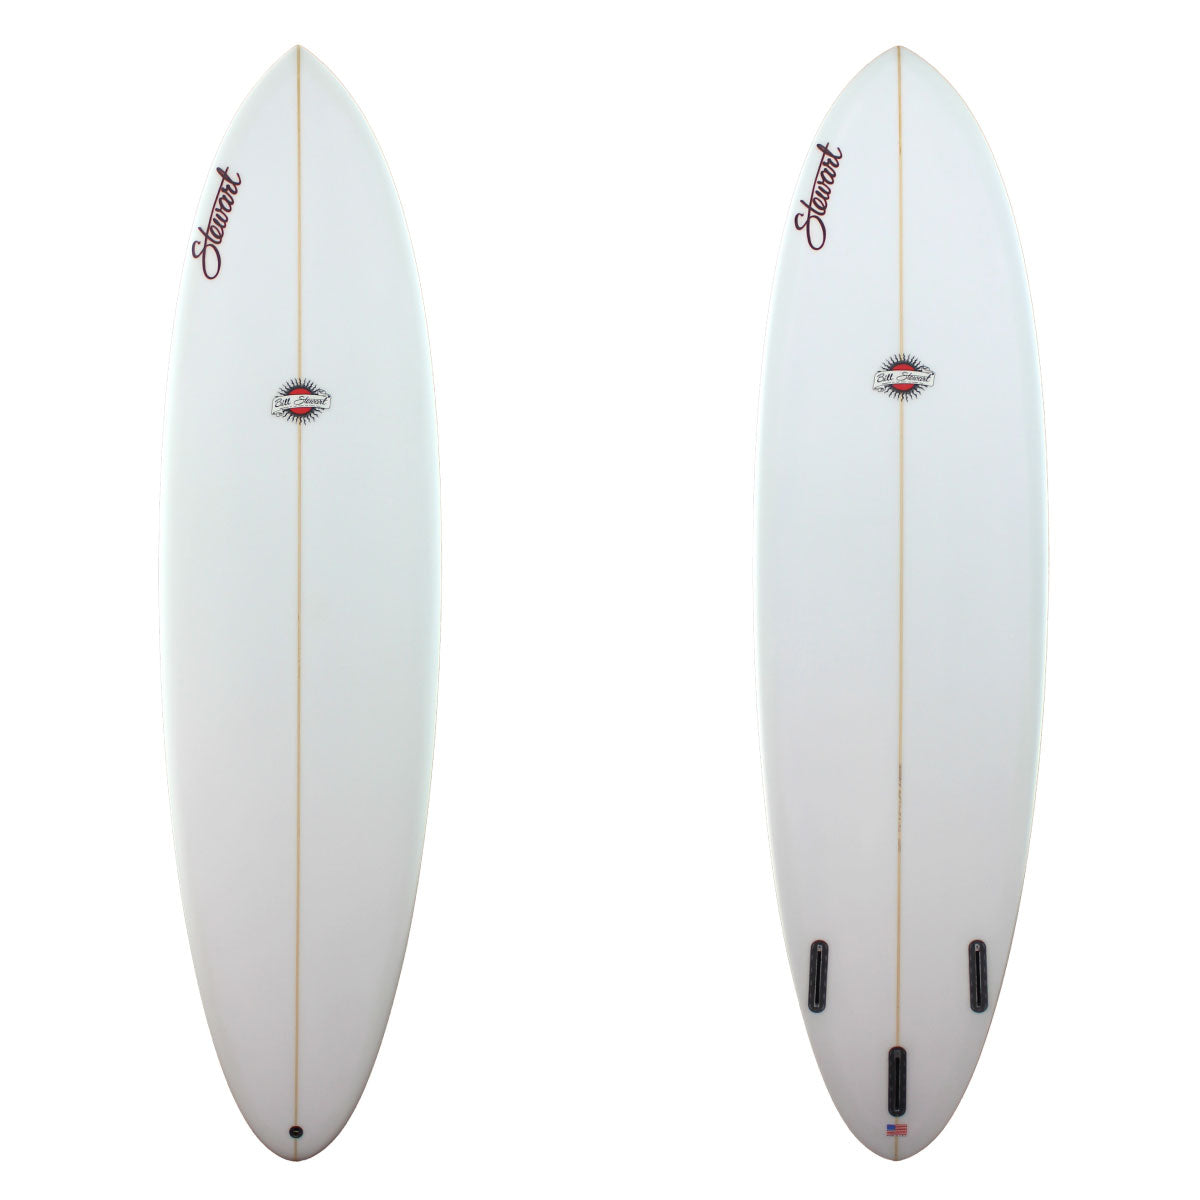 Stewart Surfboards 7'6 Funboard Comp with clear white deck and rails